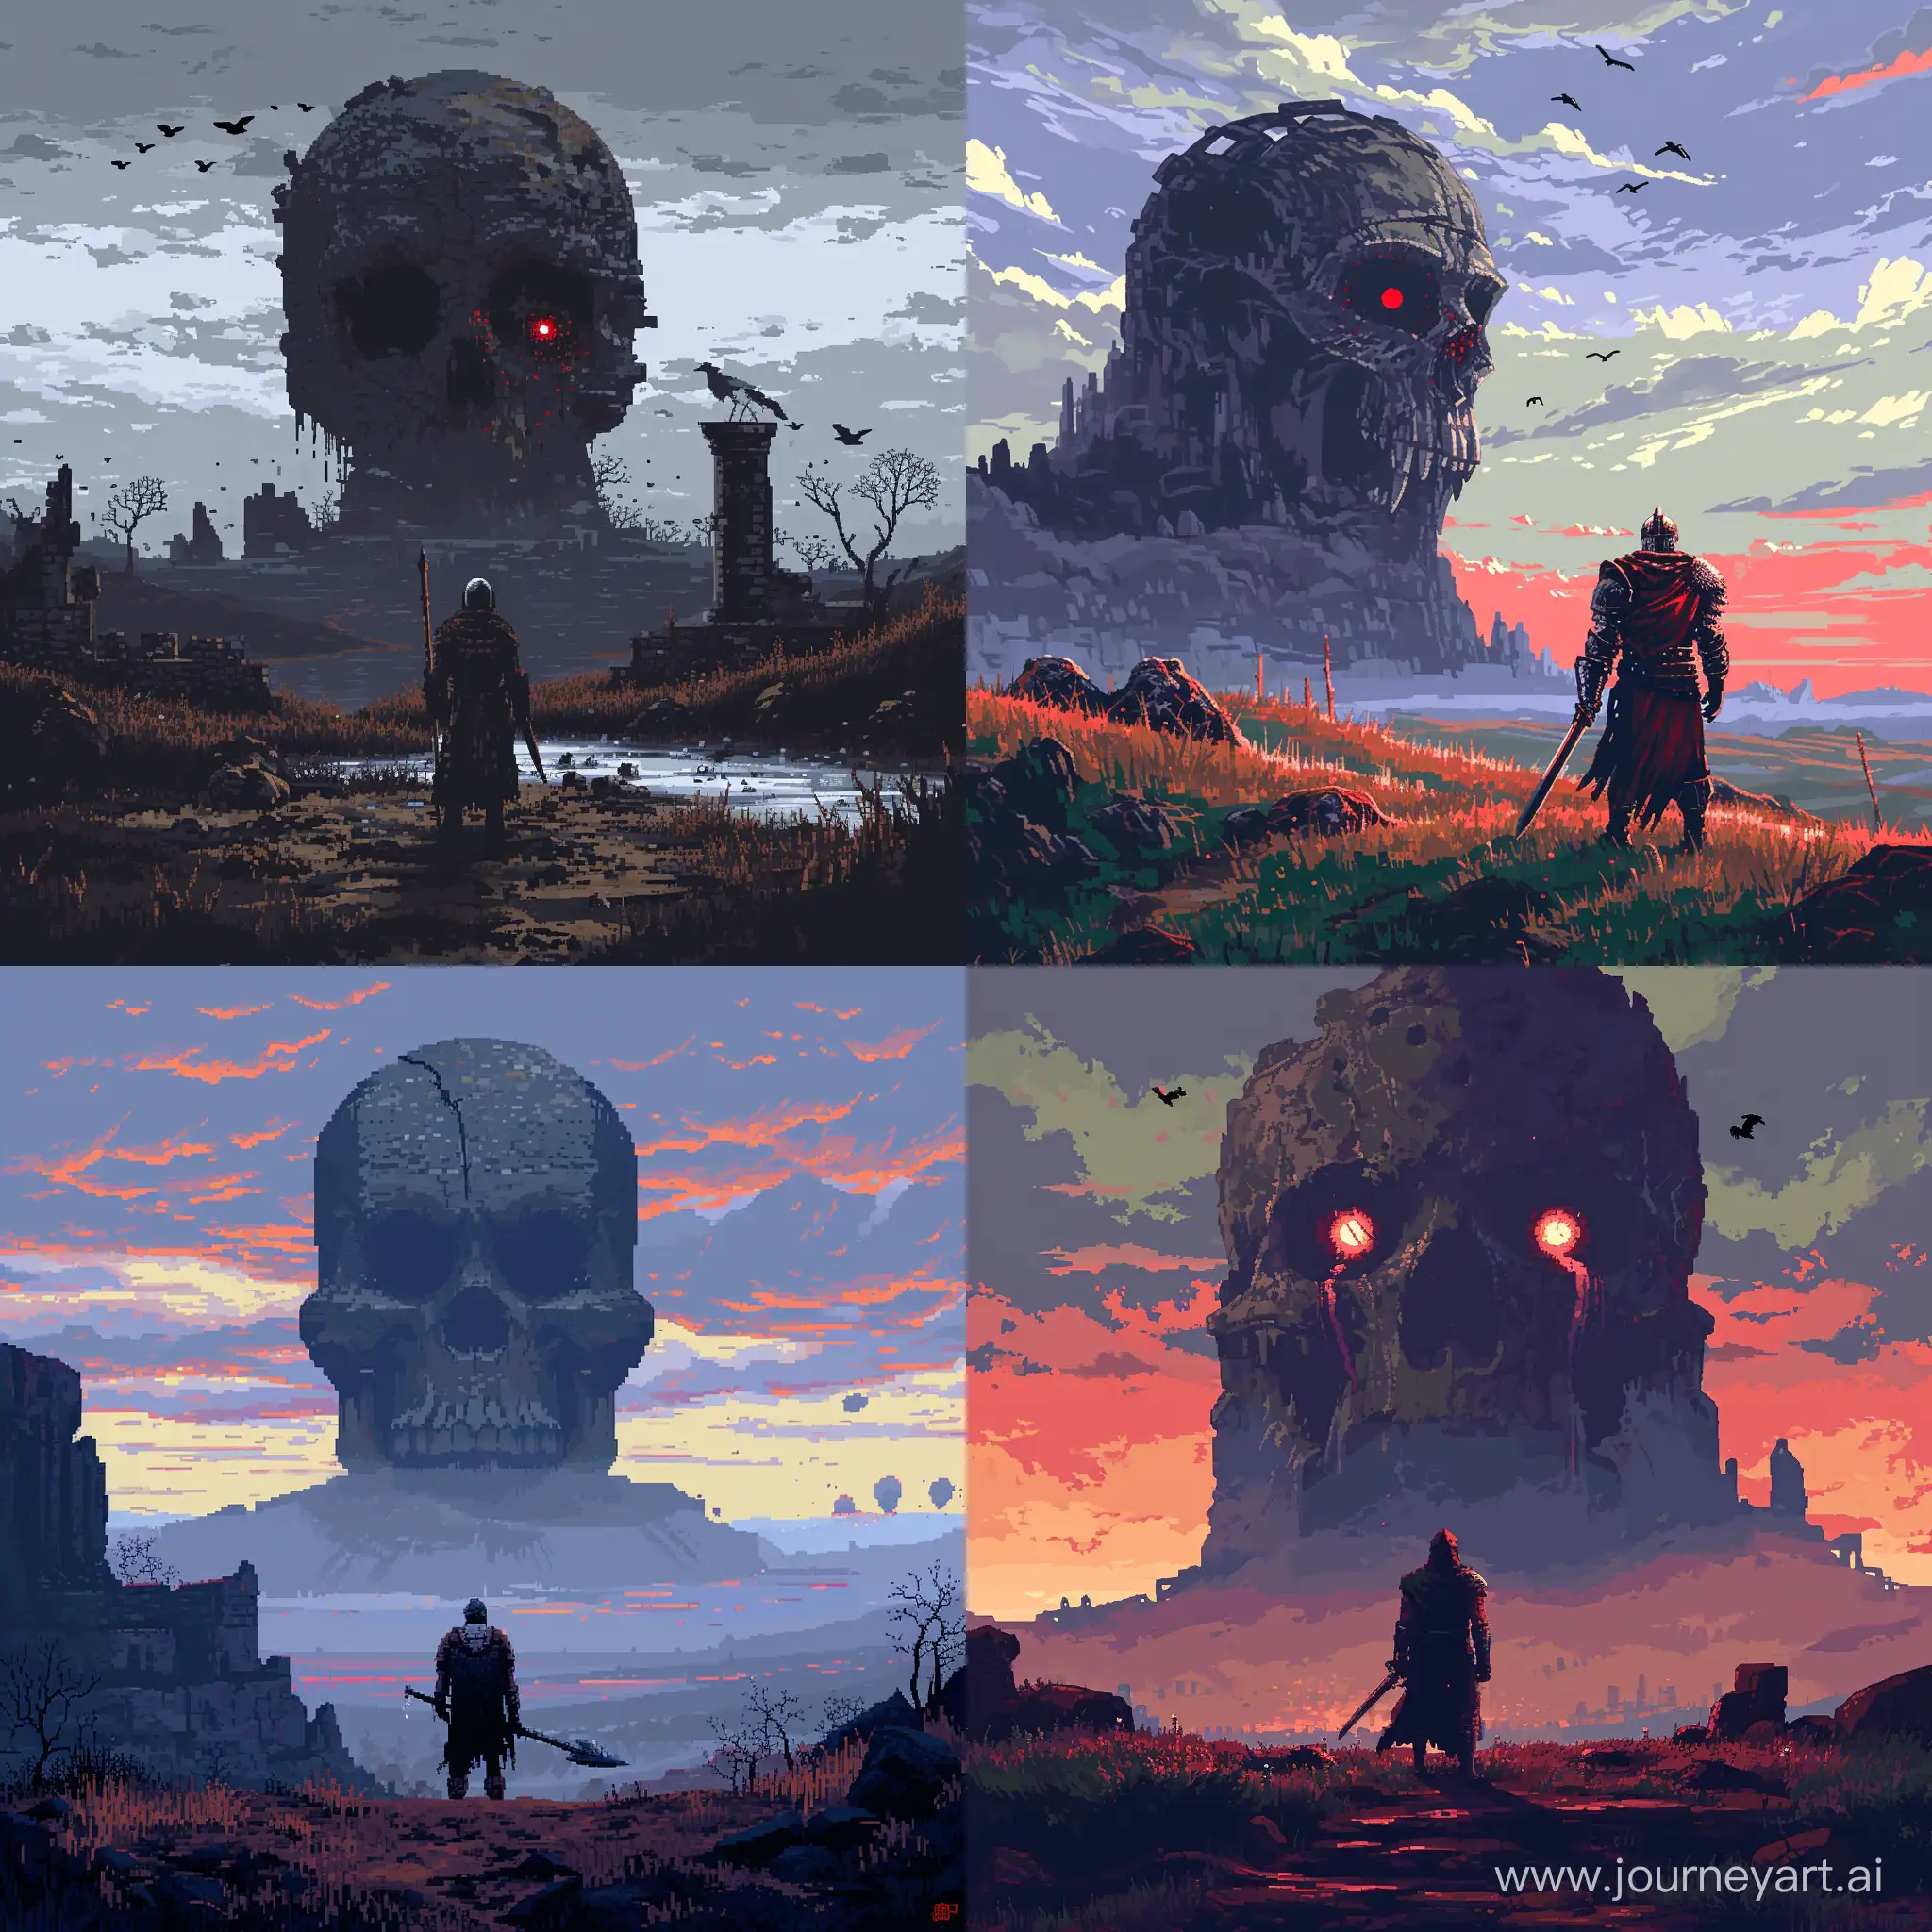 64 bit pixel art, ::1.5. a warrior stands in a desolate land with a giant skull looming above them. The warrior is equipped with a sword and shield, there is a skull with glowing eyes in the background. The scene is set at dusk, there are crows flying around. --v 6